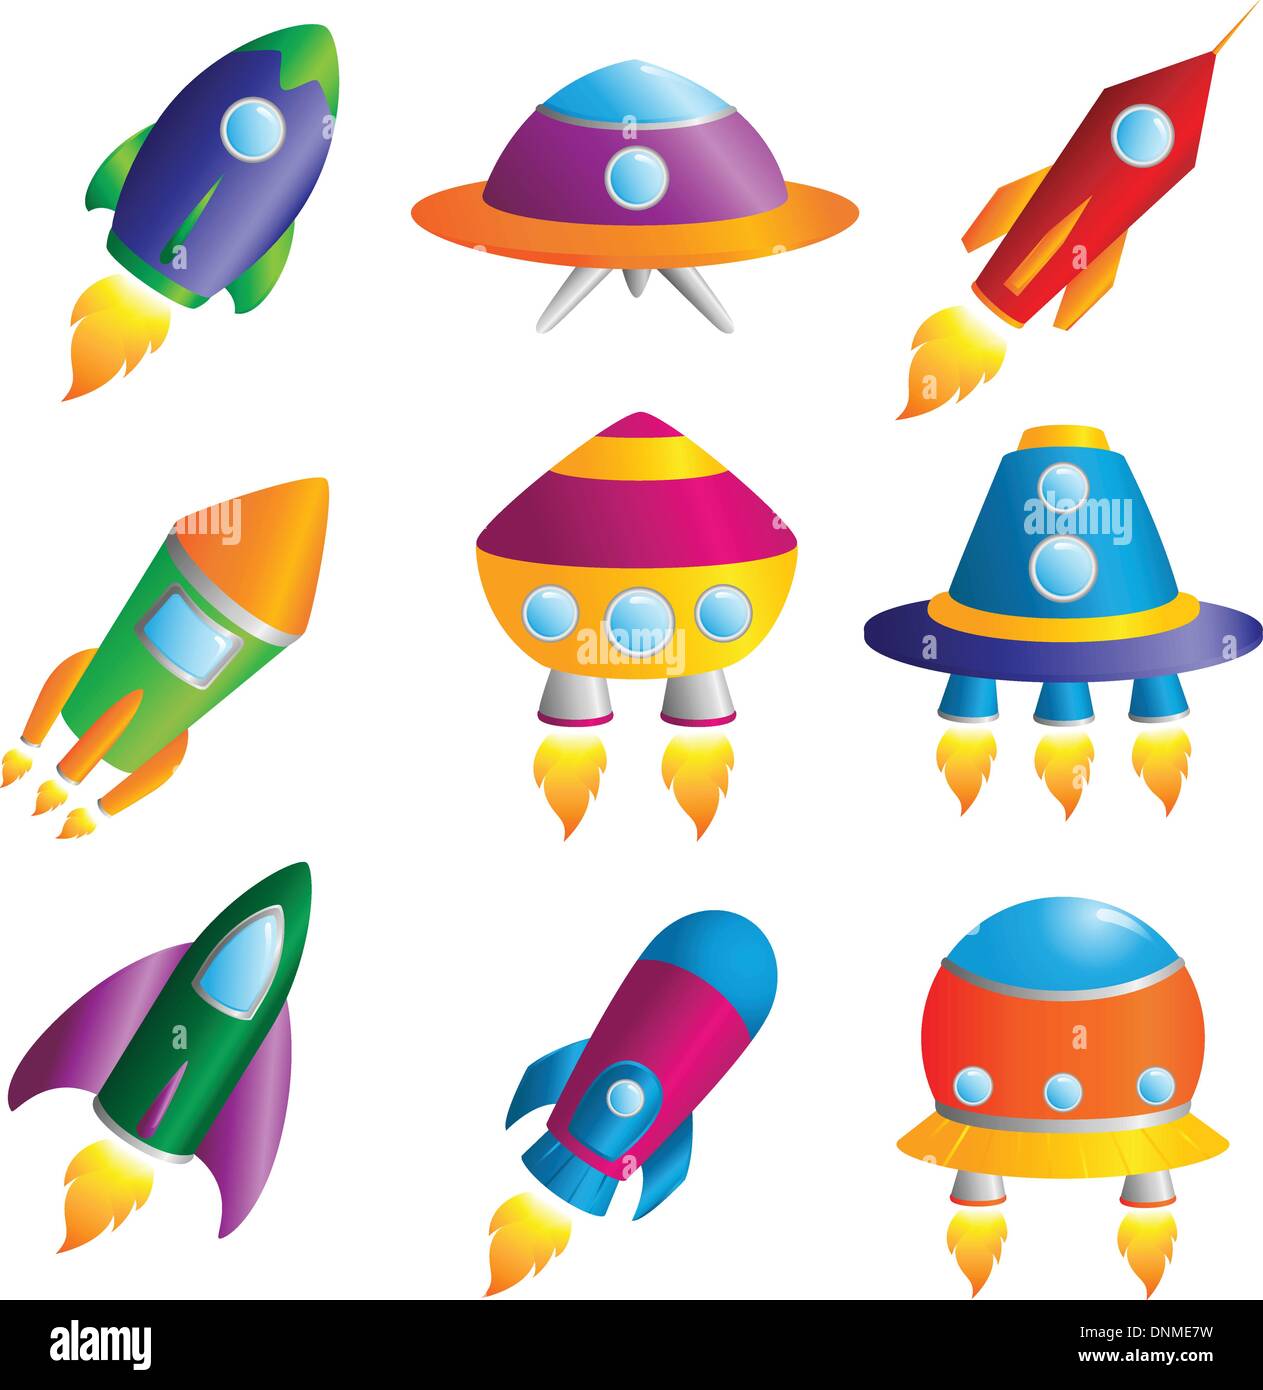 A vector illustration of a collection of colorful rockets icons Stock Vector